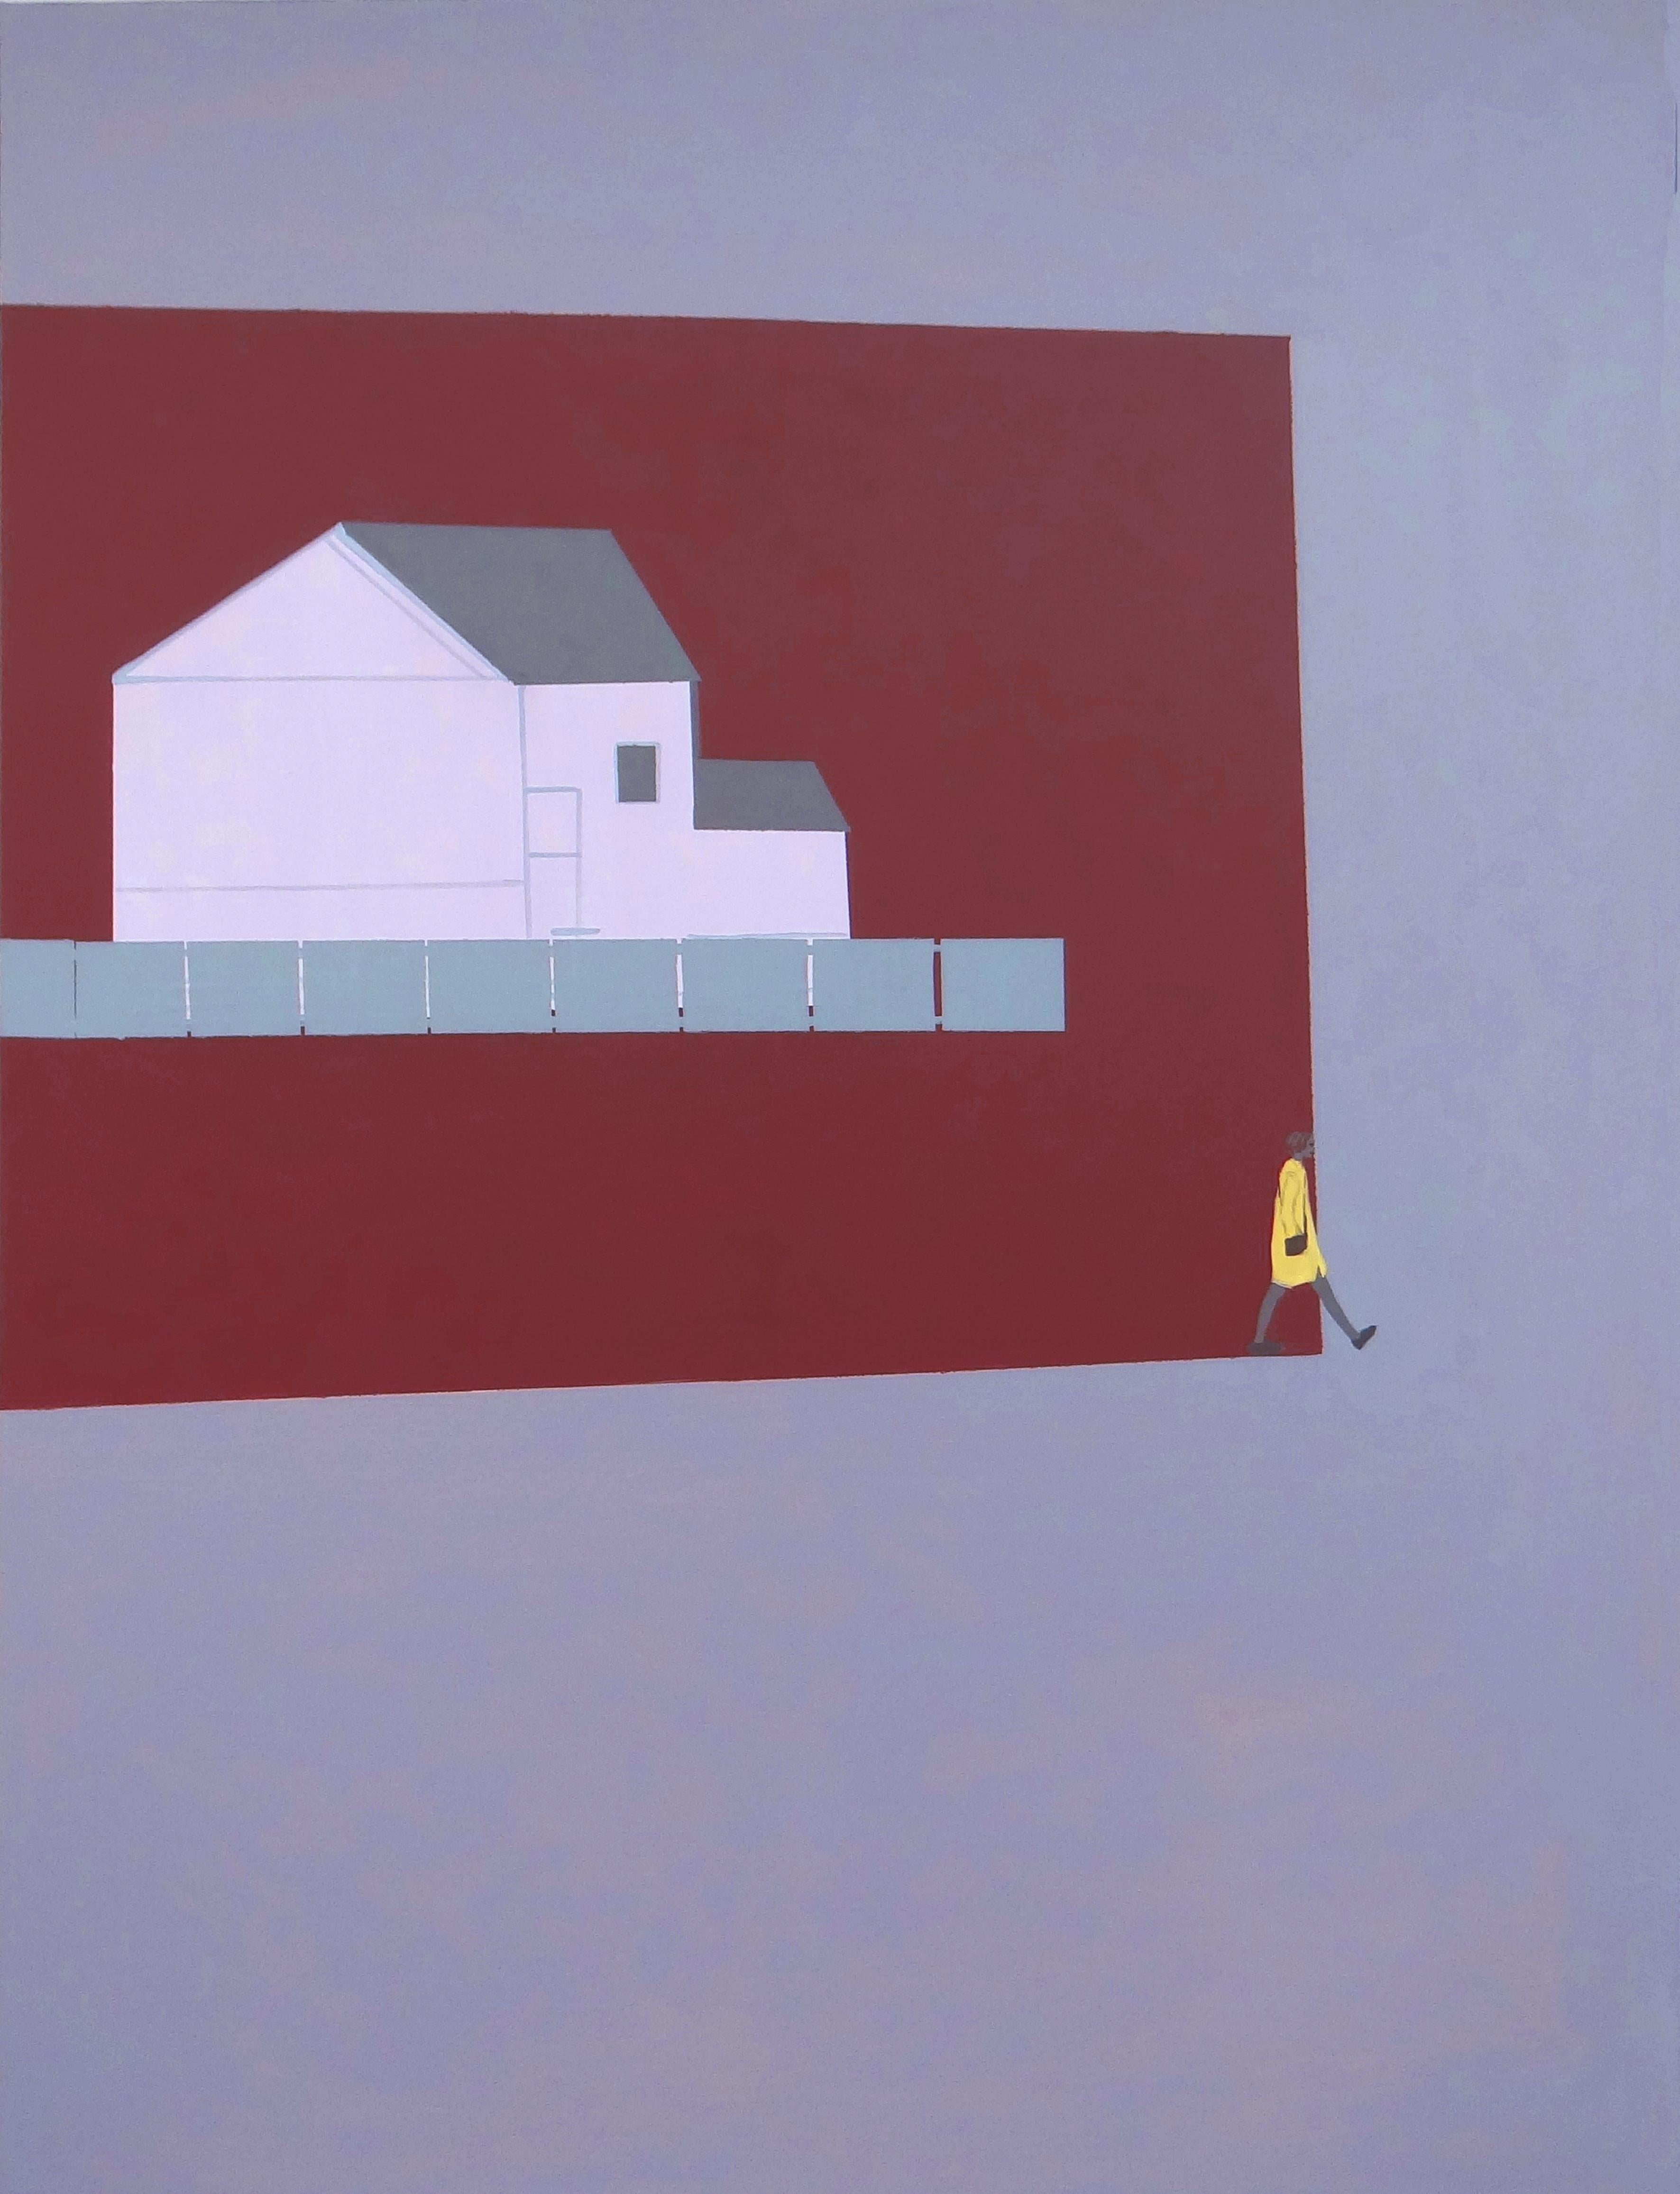 Step Forward - Contemporary Expressive Symbolic and Minimalistic Painting